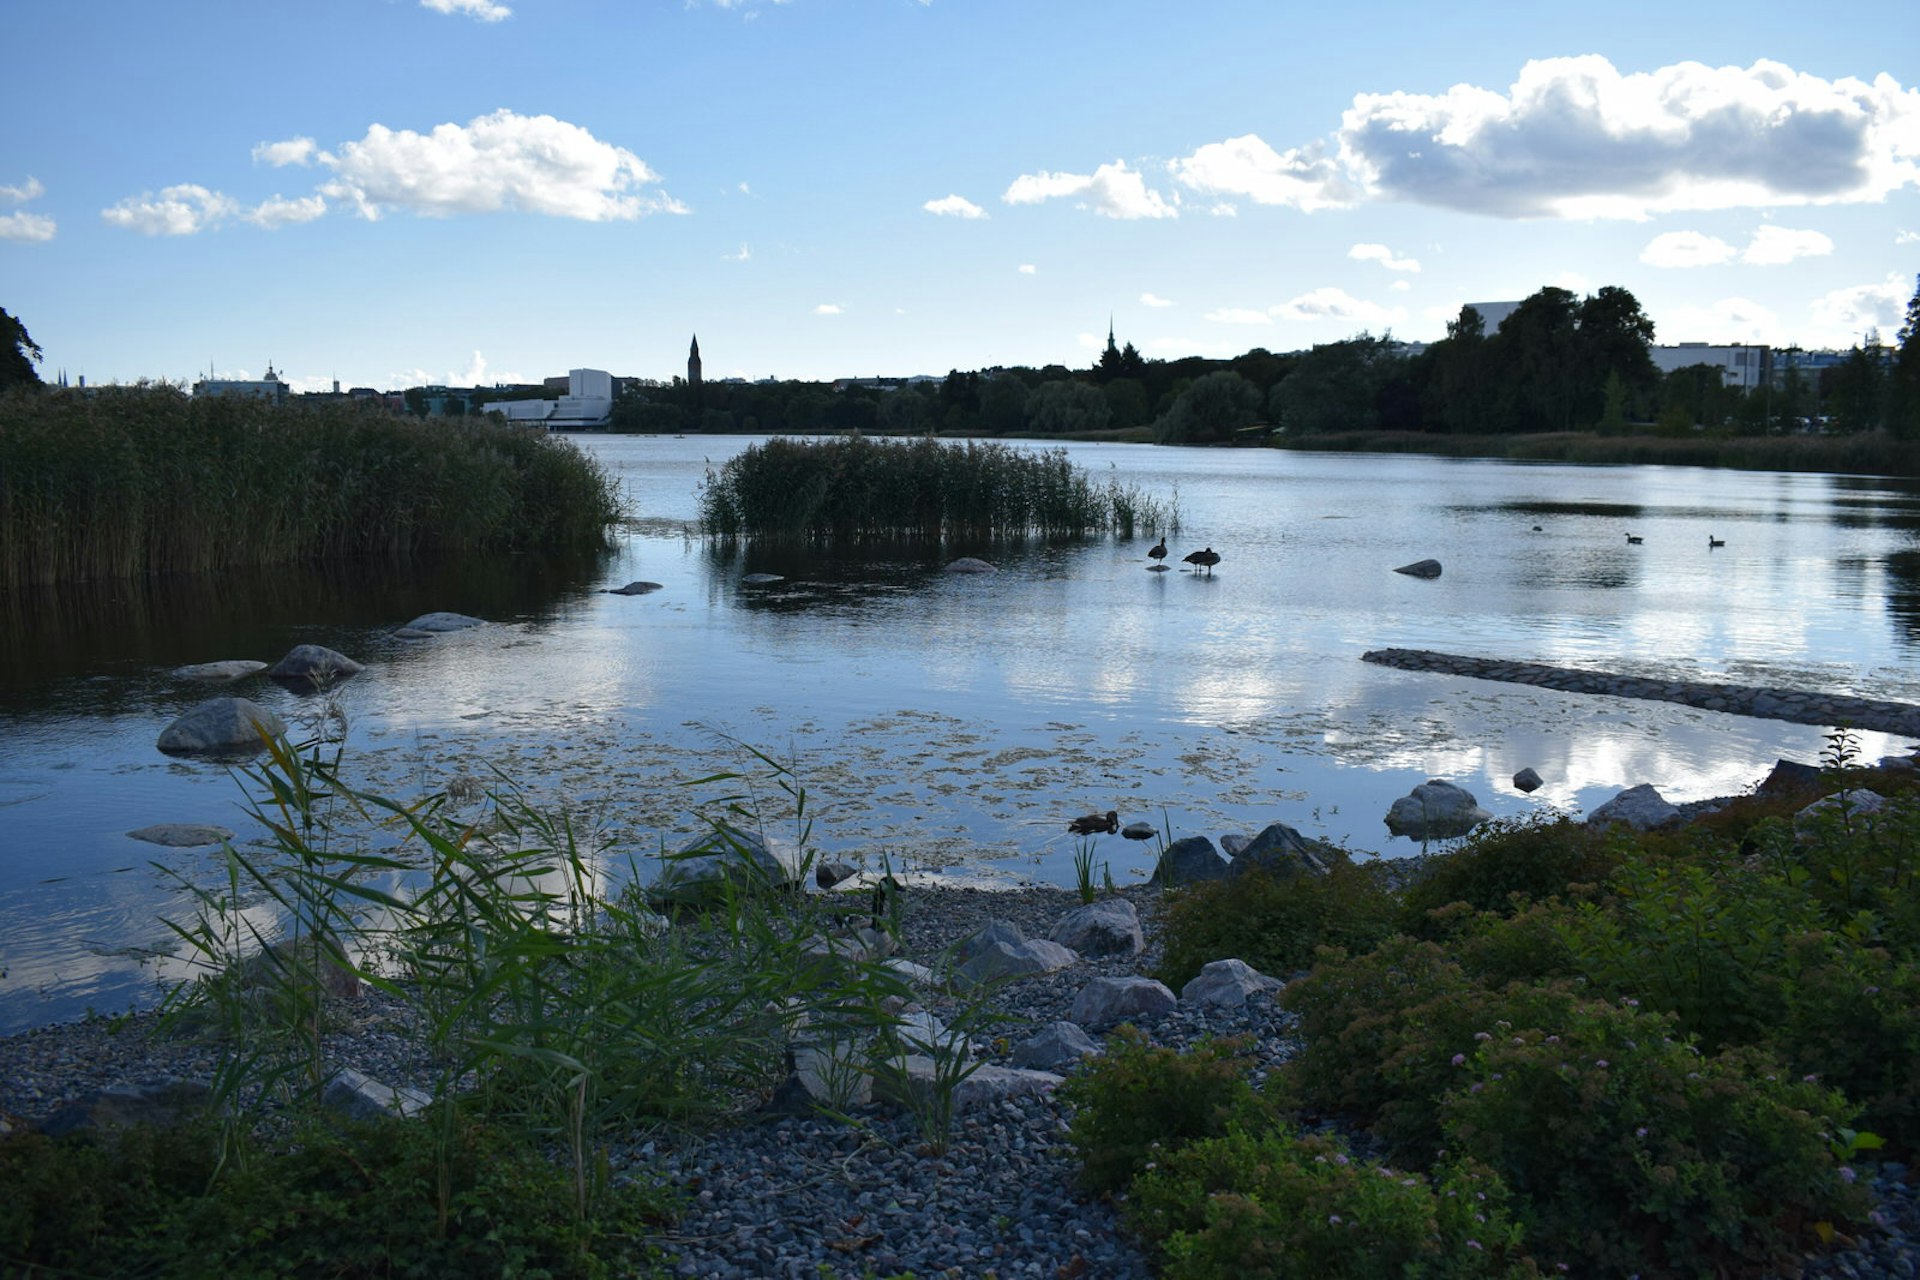 A scenic view of waterbirds wading amidst the reeds in Helsinki's Töölö Bay © Violetta Teetor / Lonely Planet